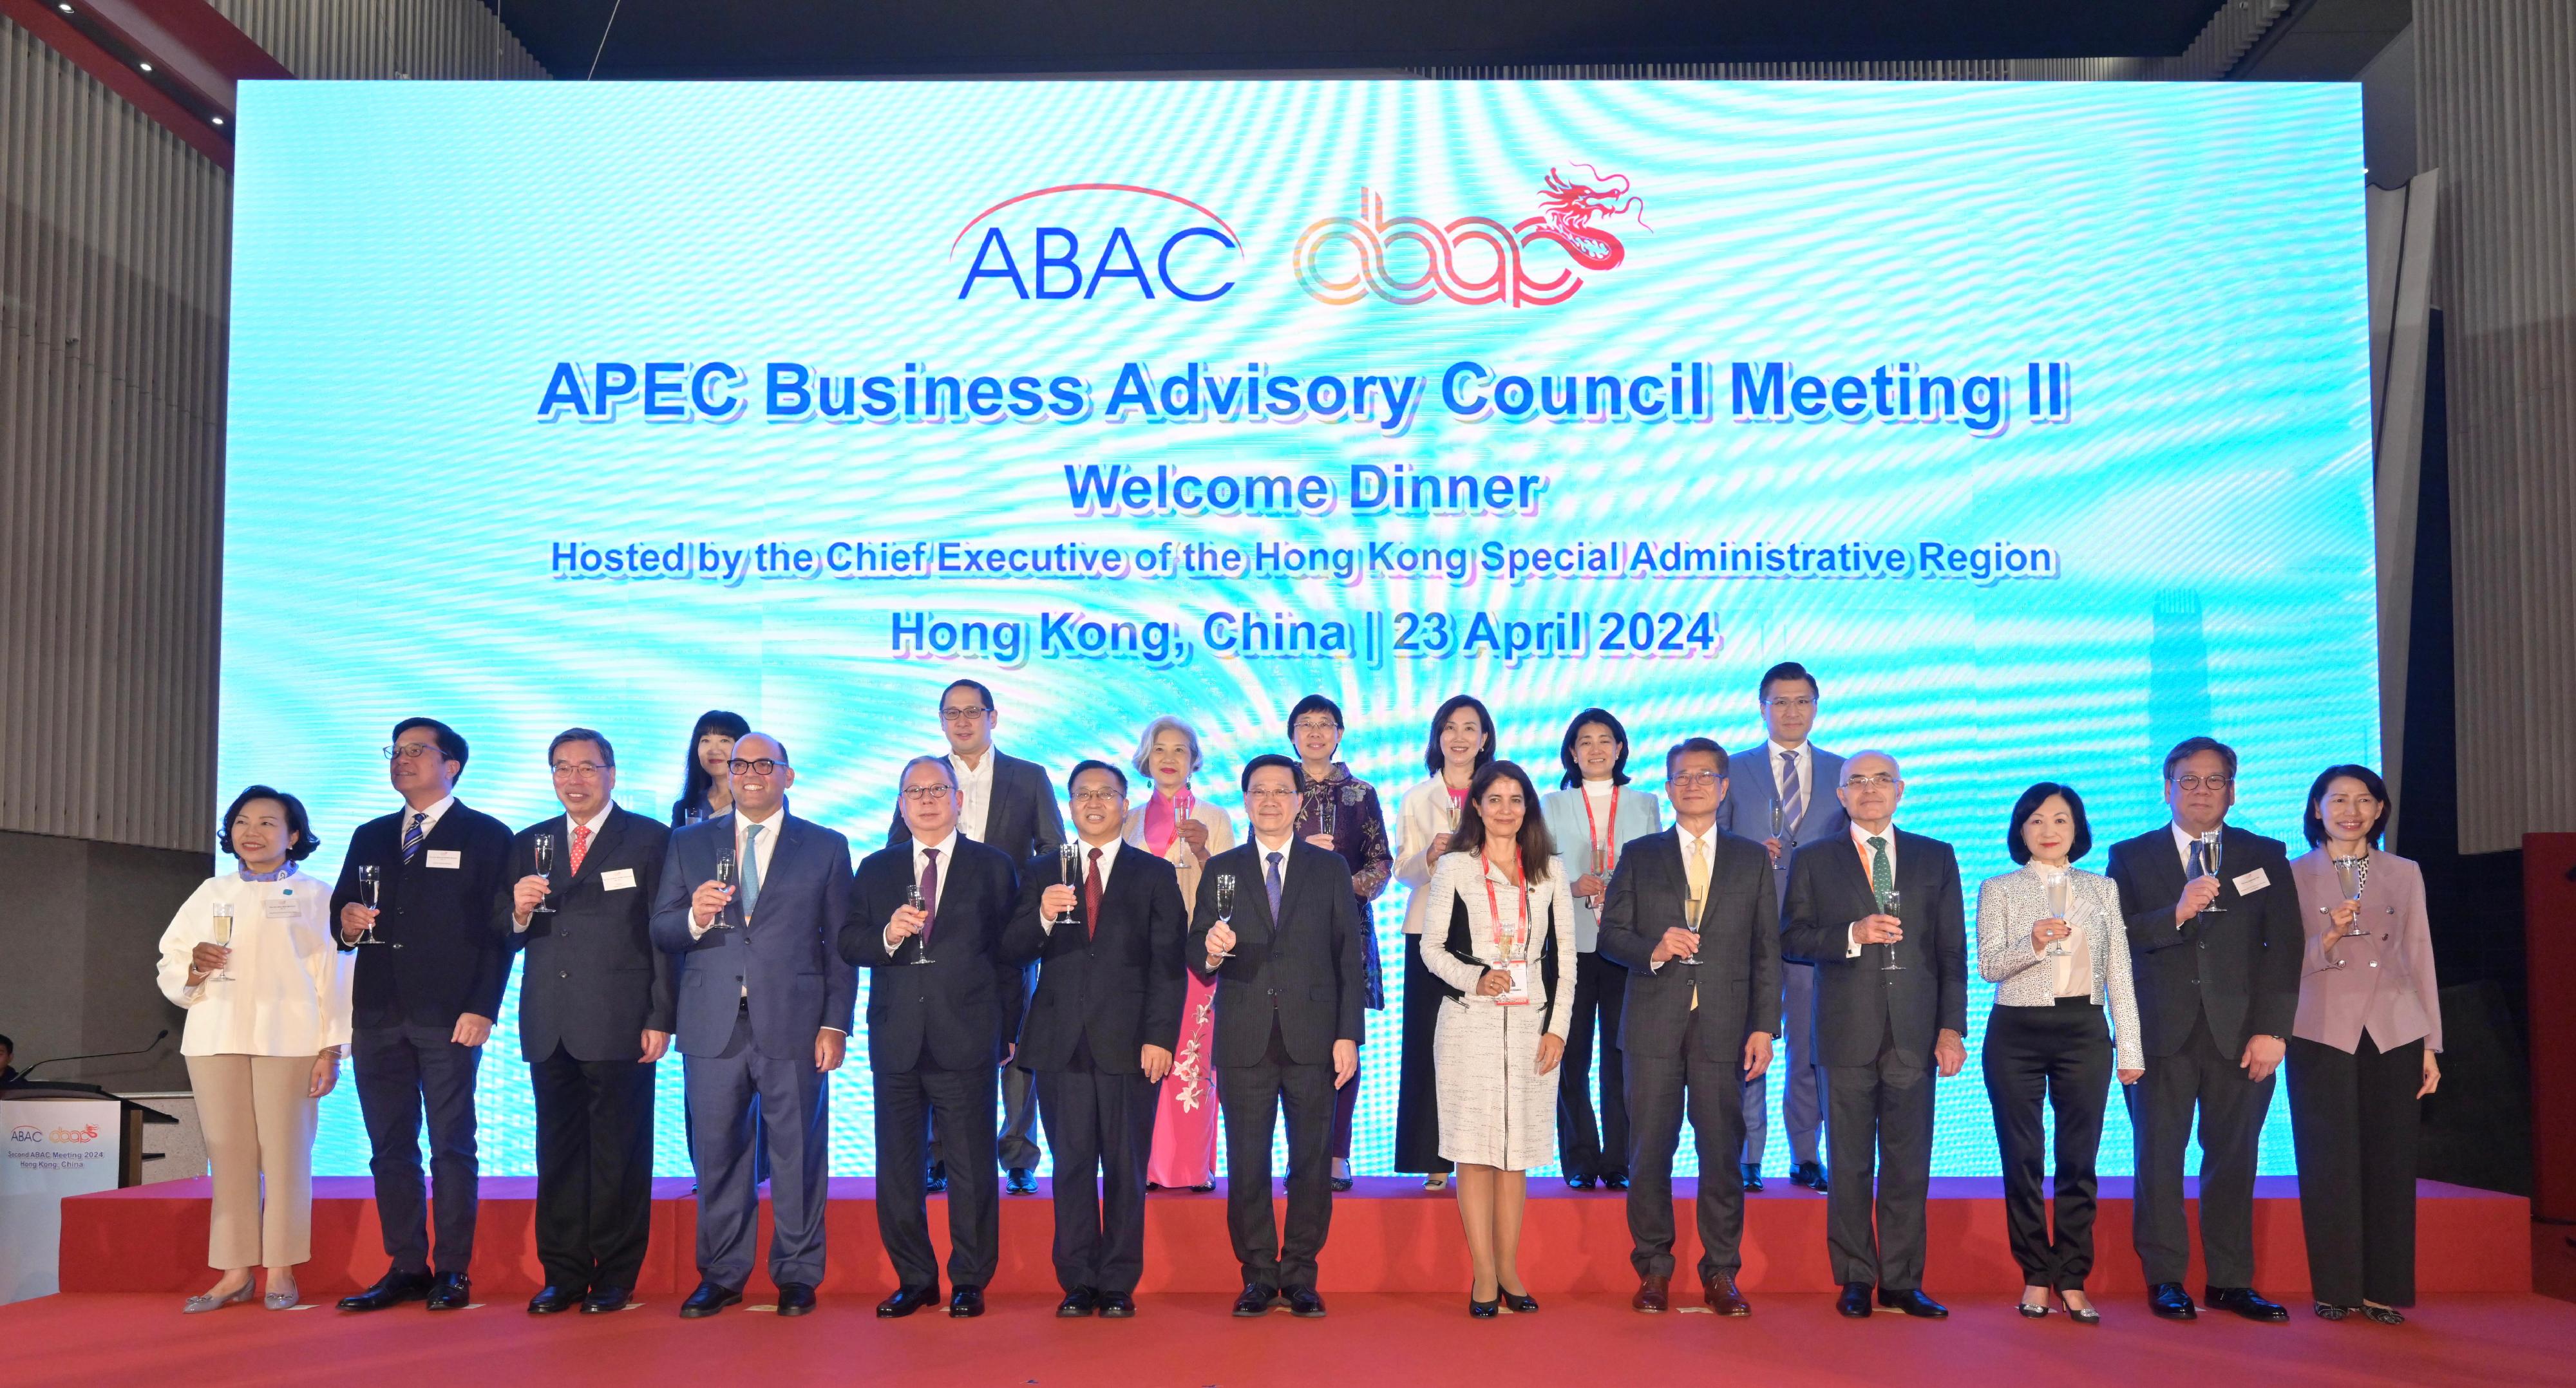 The Chief Executive, Mr John Lee, today (April 23) hosted a welcome dinner for the Asia-Pacific Economic Cooperation (APEC) Business Advisory Council (ABAC) delegates attending the second 2024 ABAC Meeting in Hong Kong. Photo shows (front row, from left) the Secretary for Home and Youth Affairs, Miss Alice Mak; the Deputy Financial Secretary, Mr Michael Wong; the President of the Legislative Council, Mr Andrew Leung; the Chair of APEC CEO Summit 2024, Mr Fernando Zavala; the Chairman of the Hong Kong Trade Development Council, Dr Peter Lam; the Commissioner of the Ministry of Foreign Affairs in the Hong Kong Special Administrative Region, Mr Cui Jianchun; Mr Lee; the Chair of the ABAC 2024, Mrs Julia Torreblanca; the Financial Secretary, Mr Paul Chan; the Chair of the APEC Senior Officials' Meetings 2024, Ambassador Carlos Vasquez; the Convenor of the Non-official Members of the Executive Council, Mrs Regina Ip; the Secretary for Commerce and Economic Development, Mr Algernon Yau; the Director of the Chief Executive's Office, Ms Carol Yip; and other guests proposing a toast.